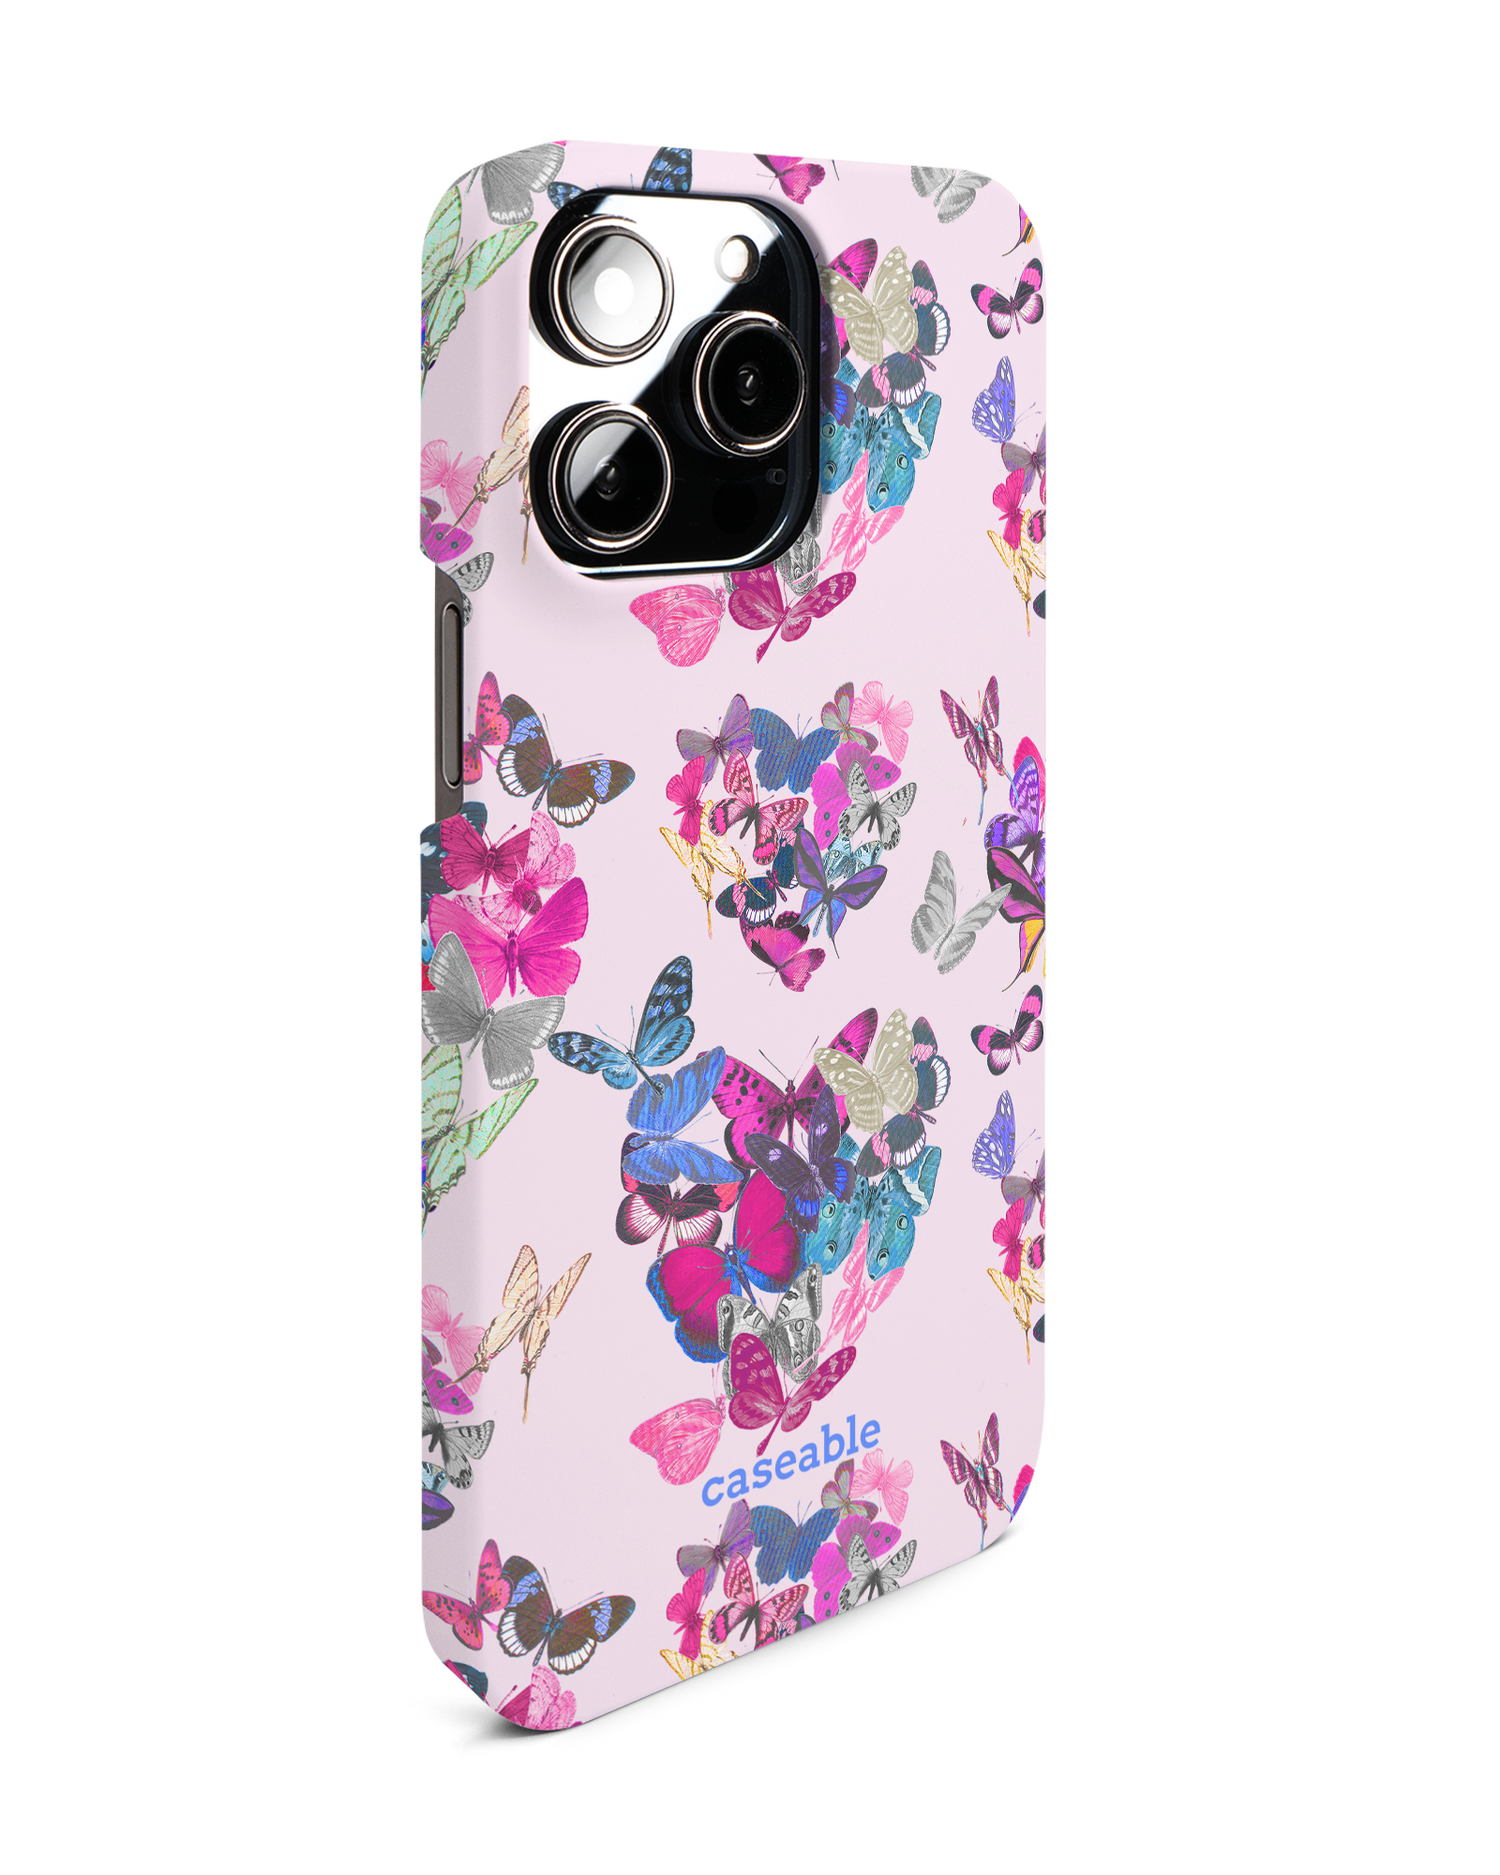 Butterfly Love Hard Shell Phone Case for Apple iPhone 14 Pro Max: View from the left side